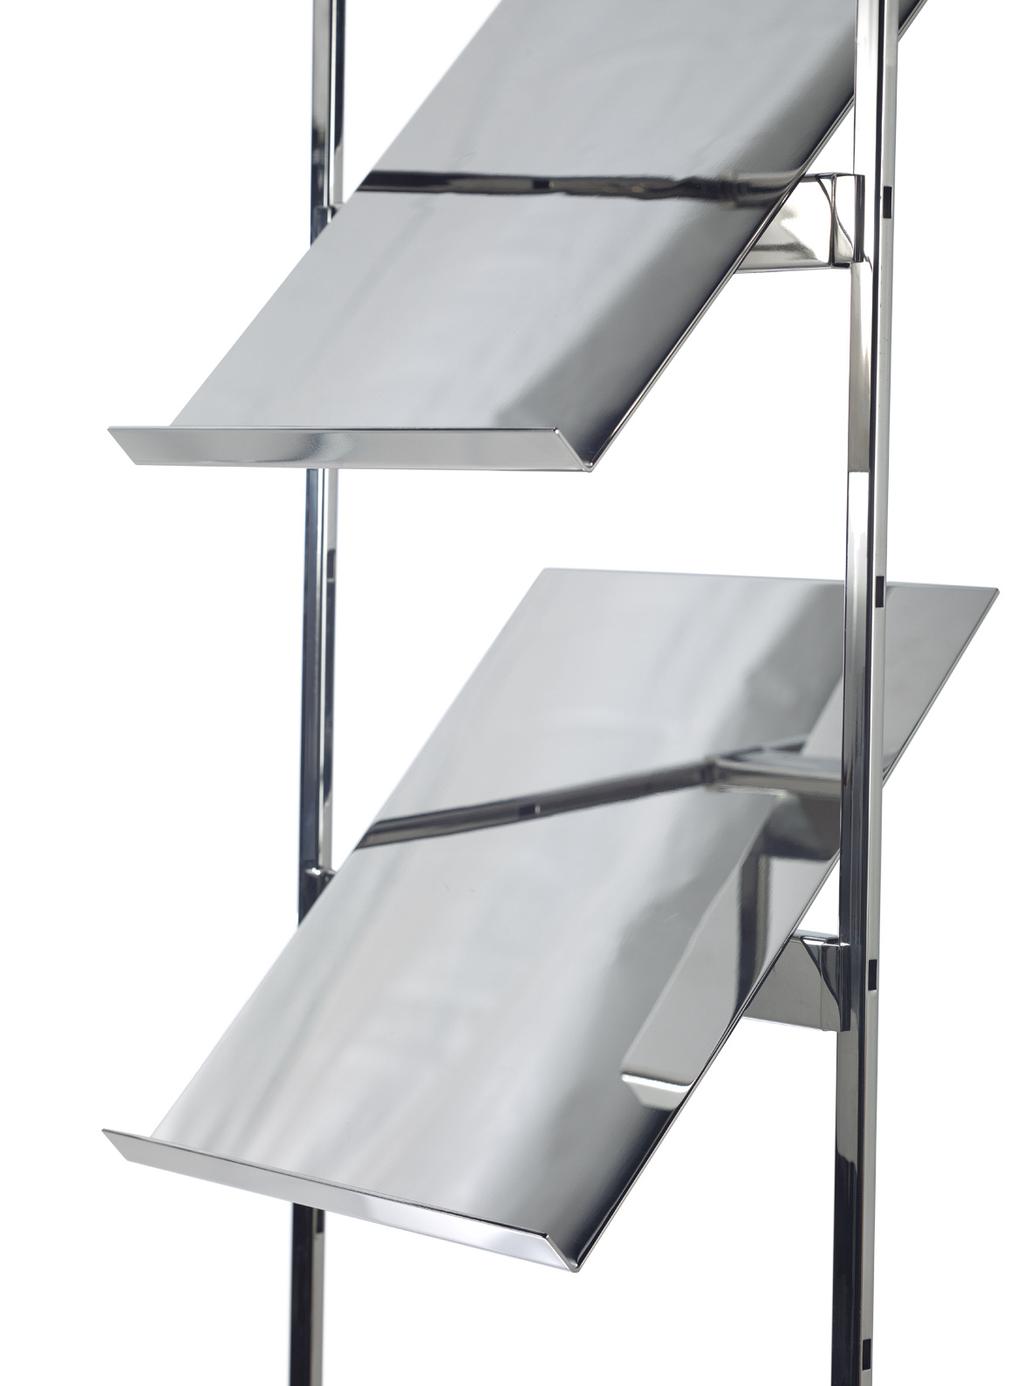 Angled Shelves Angled Shelves are perfect for displaying shirts, printed items, sweaters, or shoes. They are available in polished stainless steel, acrylic, or wood.